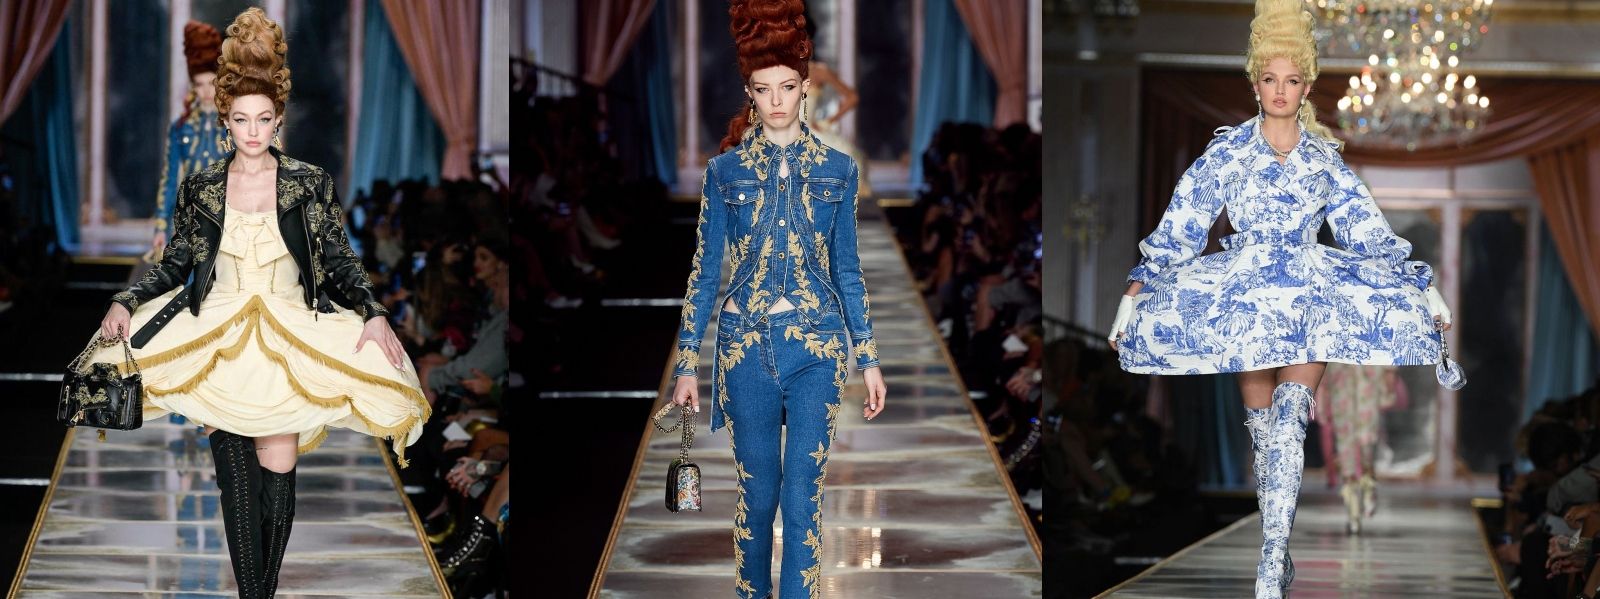 images easyblog articles 9705 moschino fall winter 2020 756f1d18